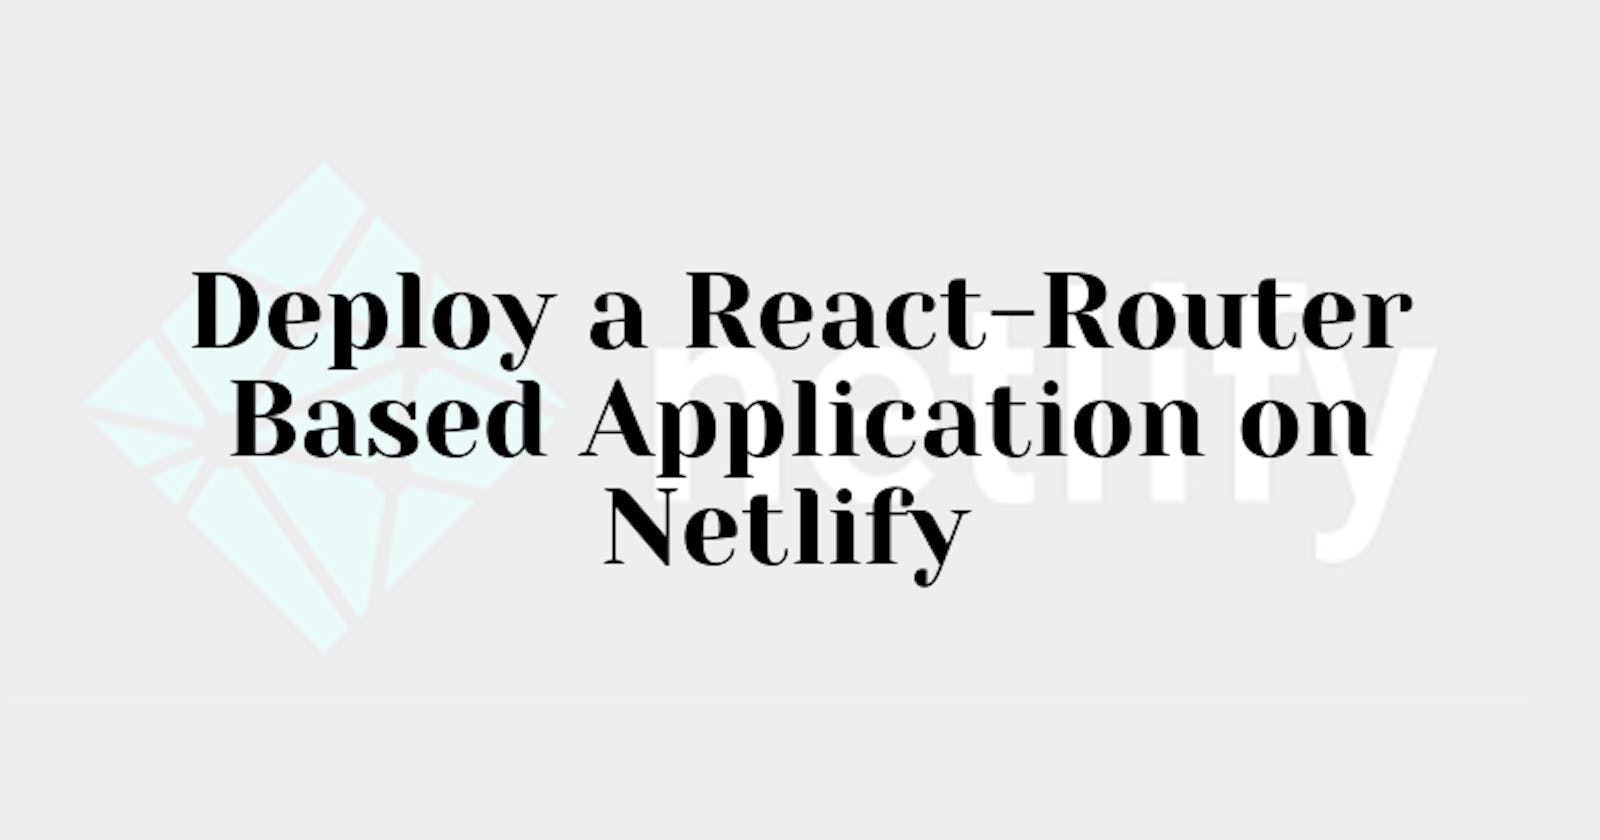 How to deploy a react-router based application?